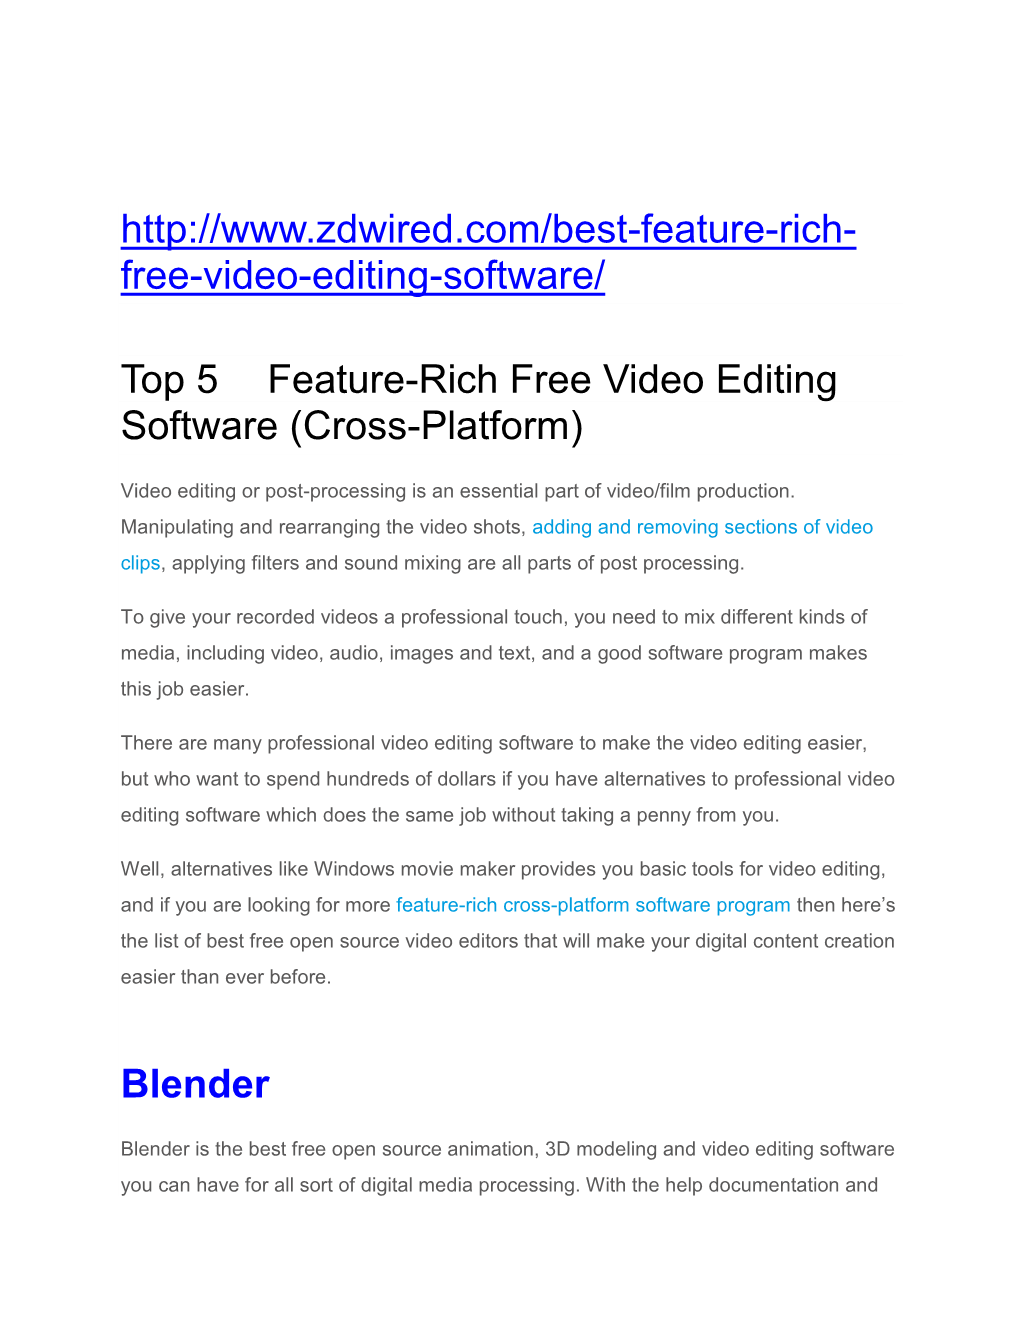 Free-Video-Editing-Software